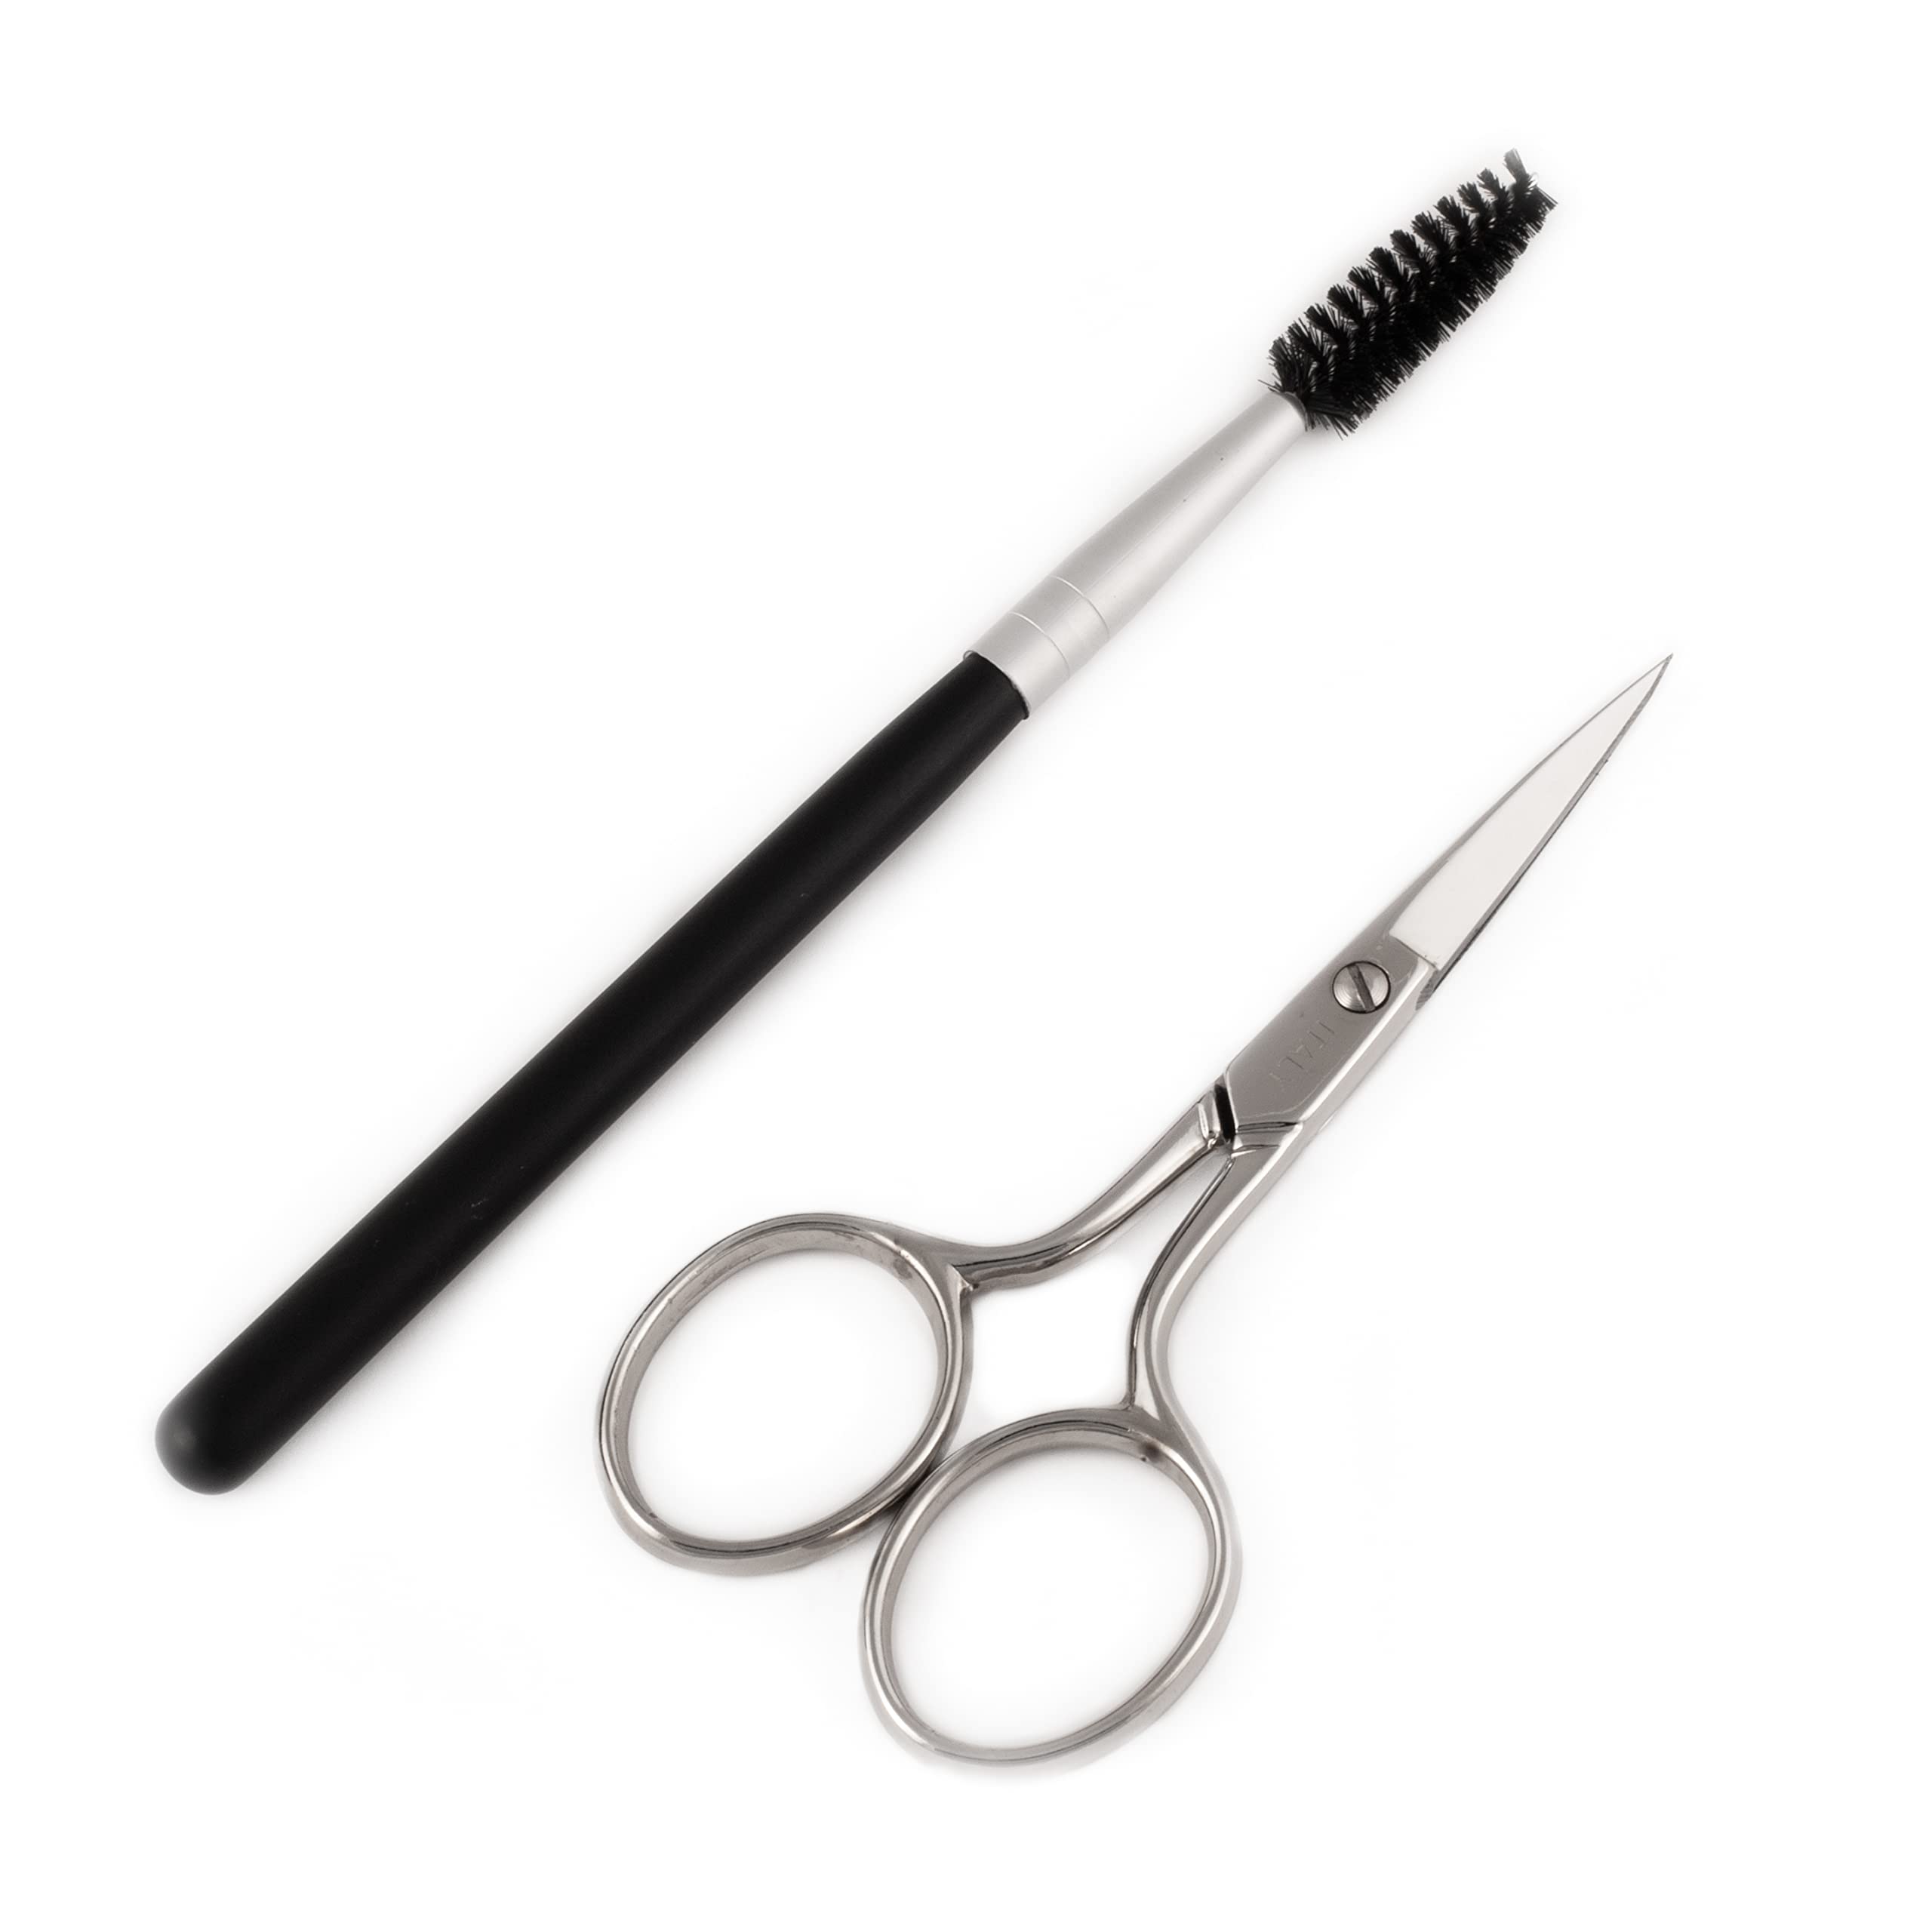 Stainless steel beauty embroidery scissors Brow scissors Pointed